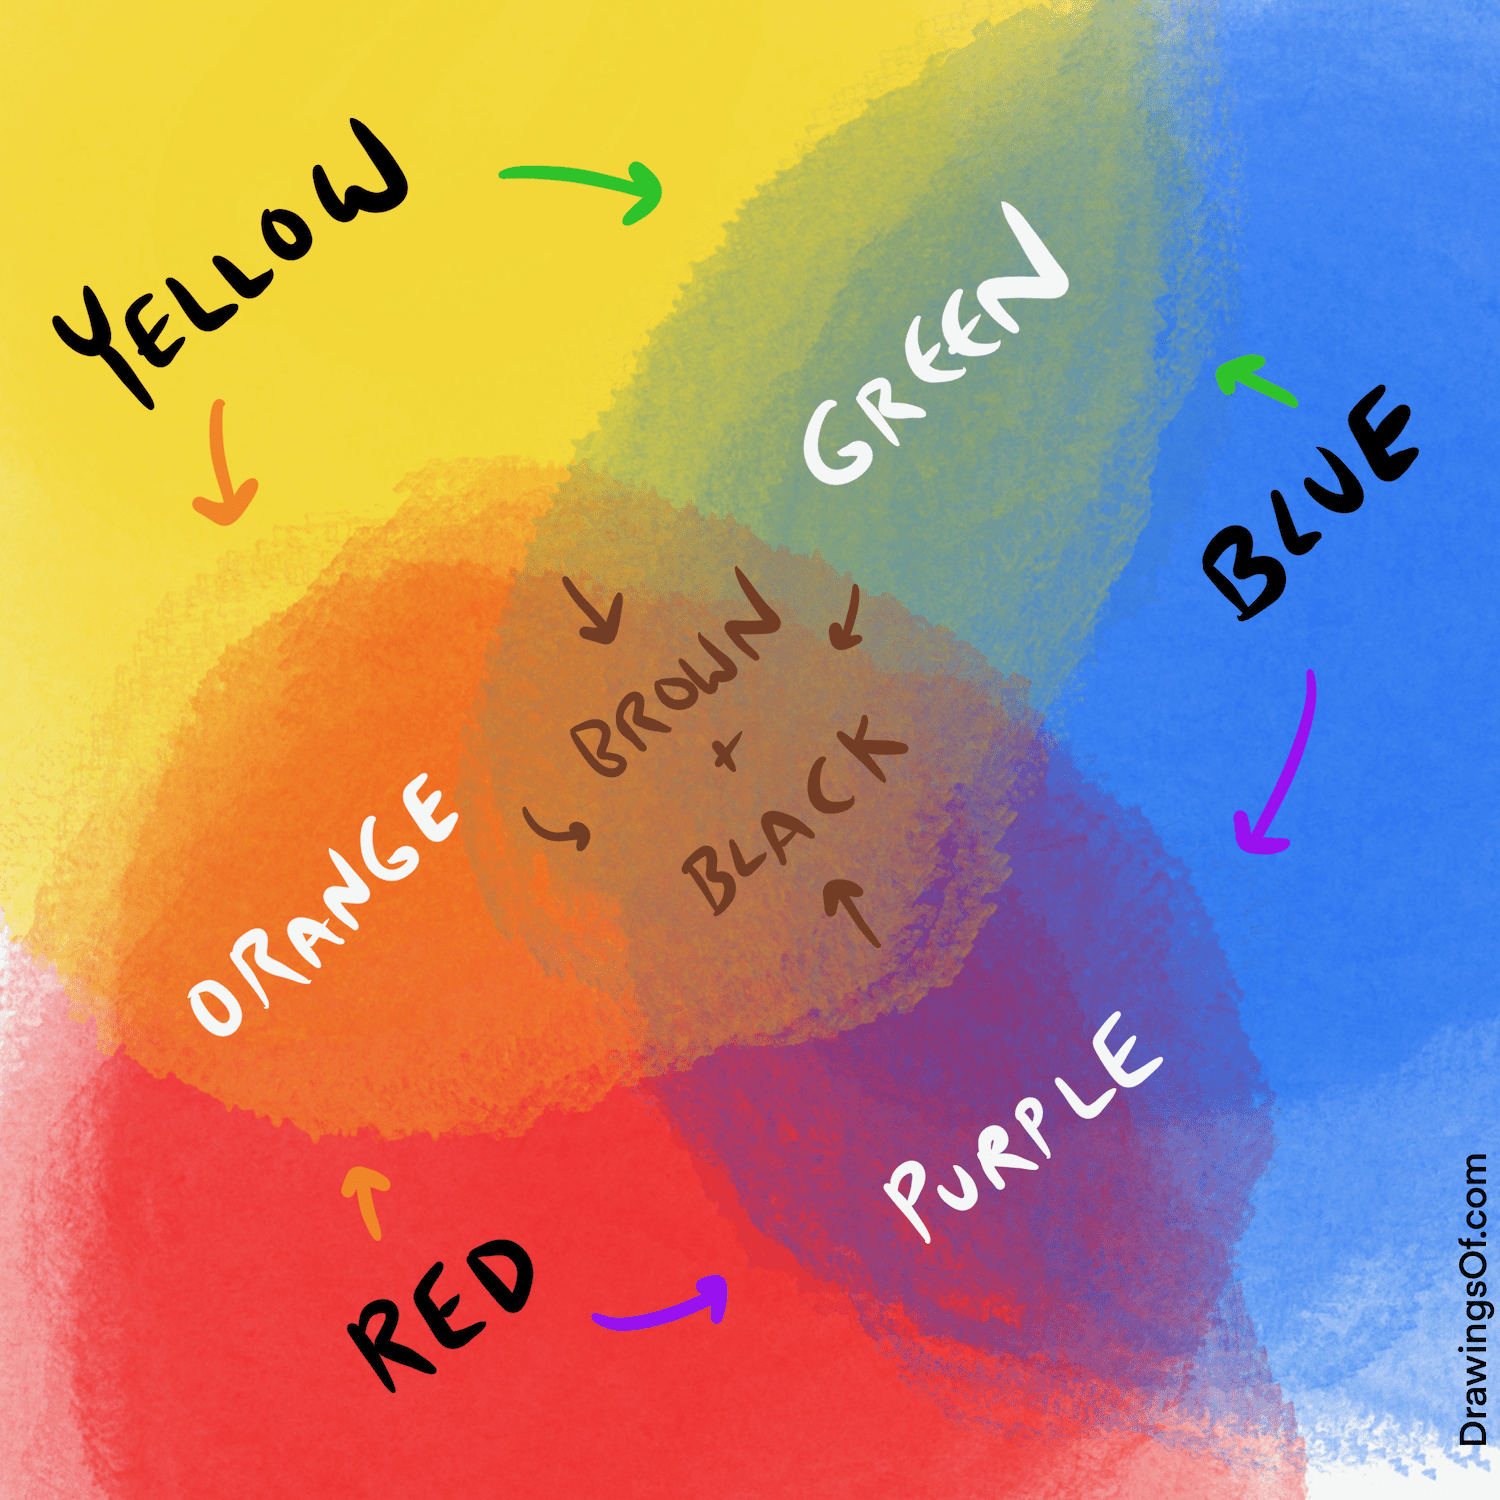 Primary color mixing chart